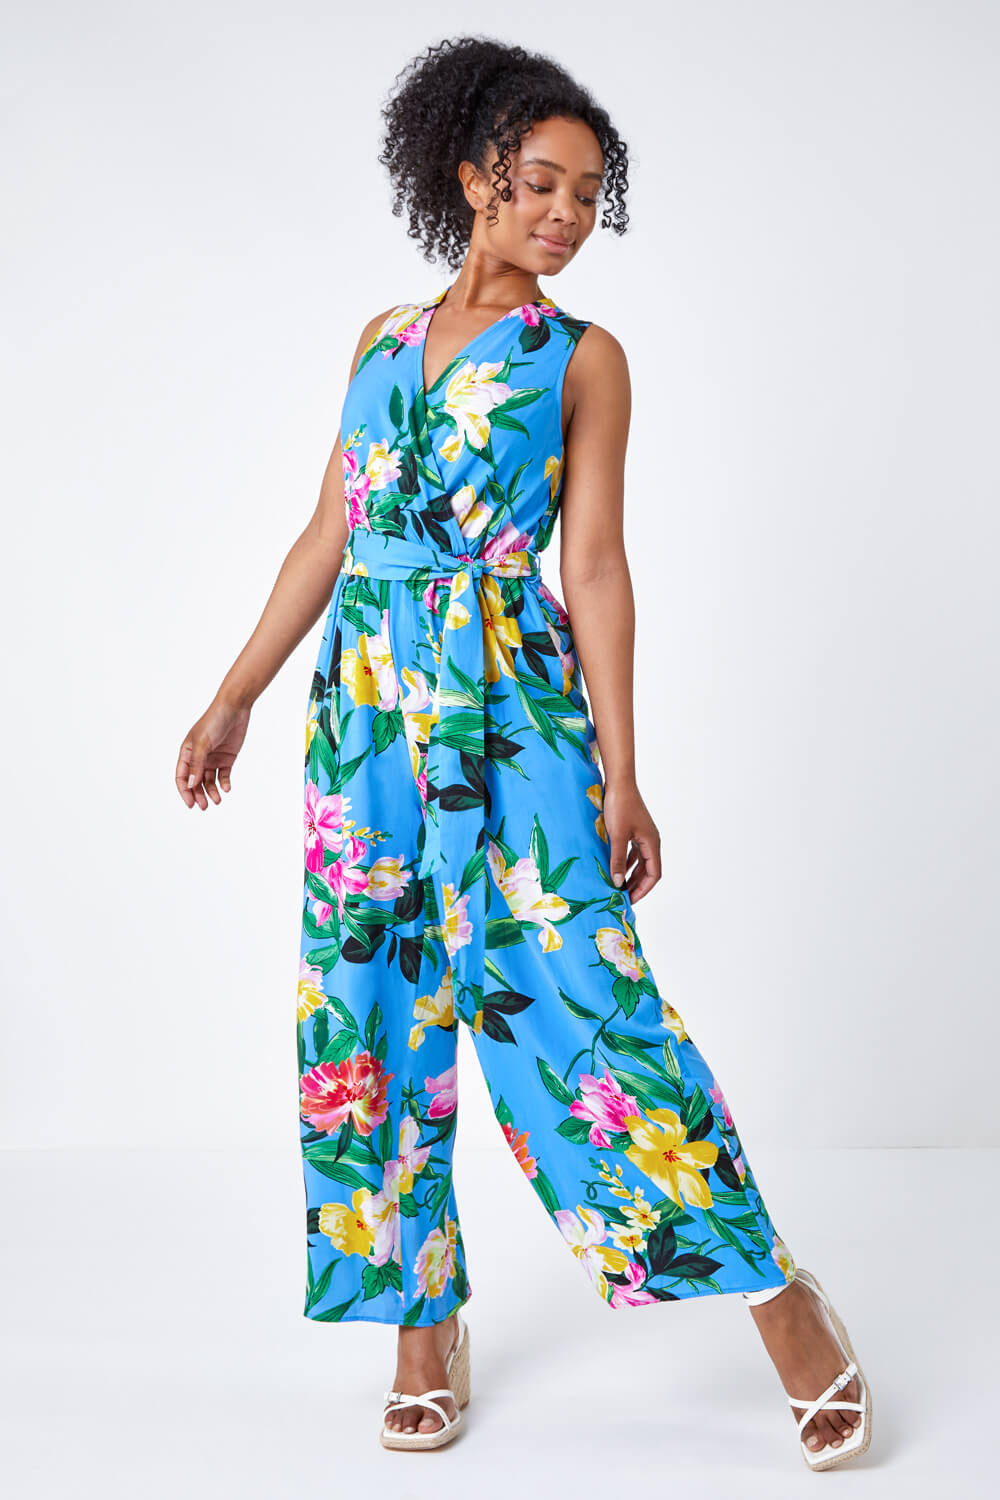 Turquoise Petite Floral Print Stretch Chiffon Jumpsuit, Image 2 of 5